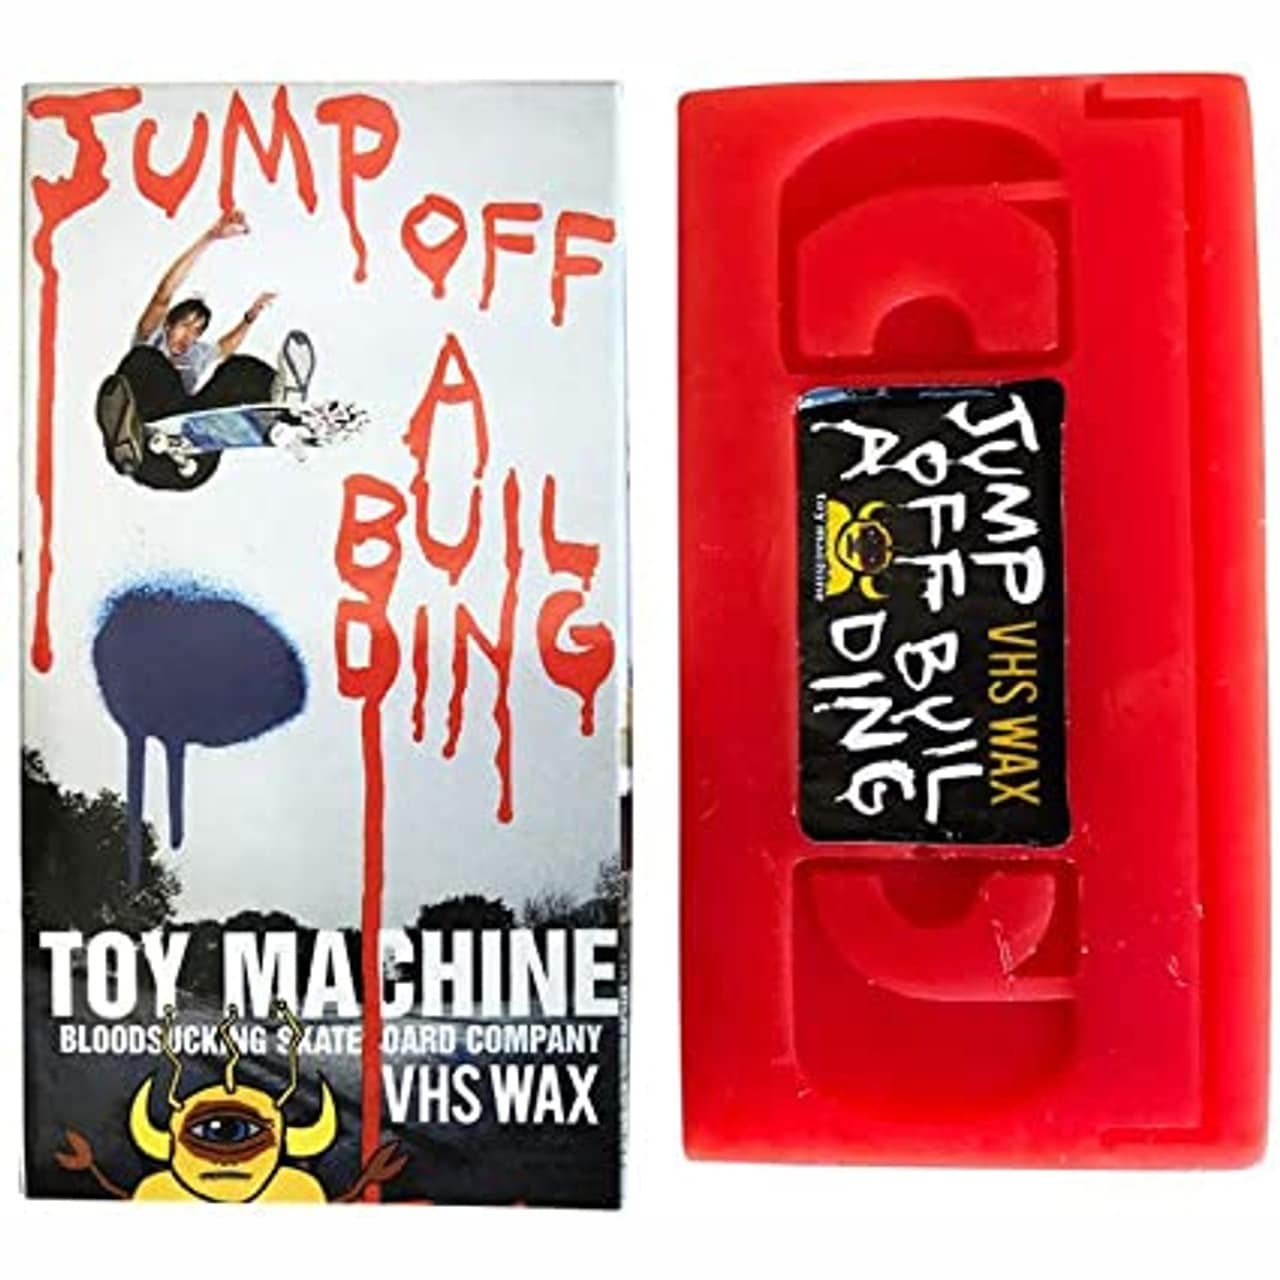 Toy Machine Wax Jump Off A Building